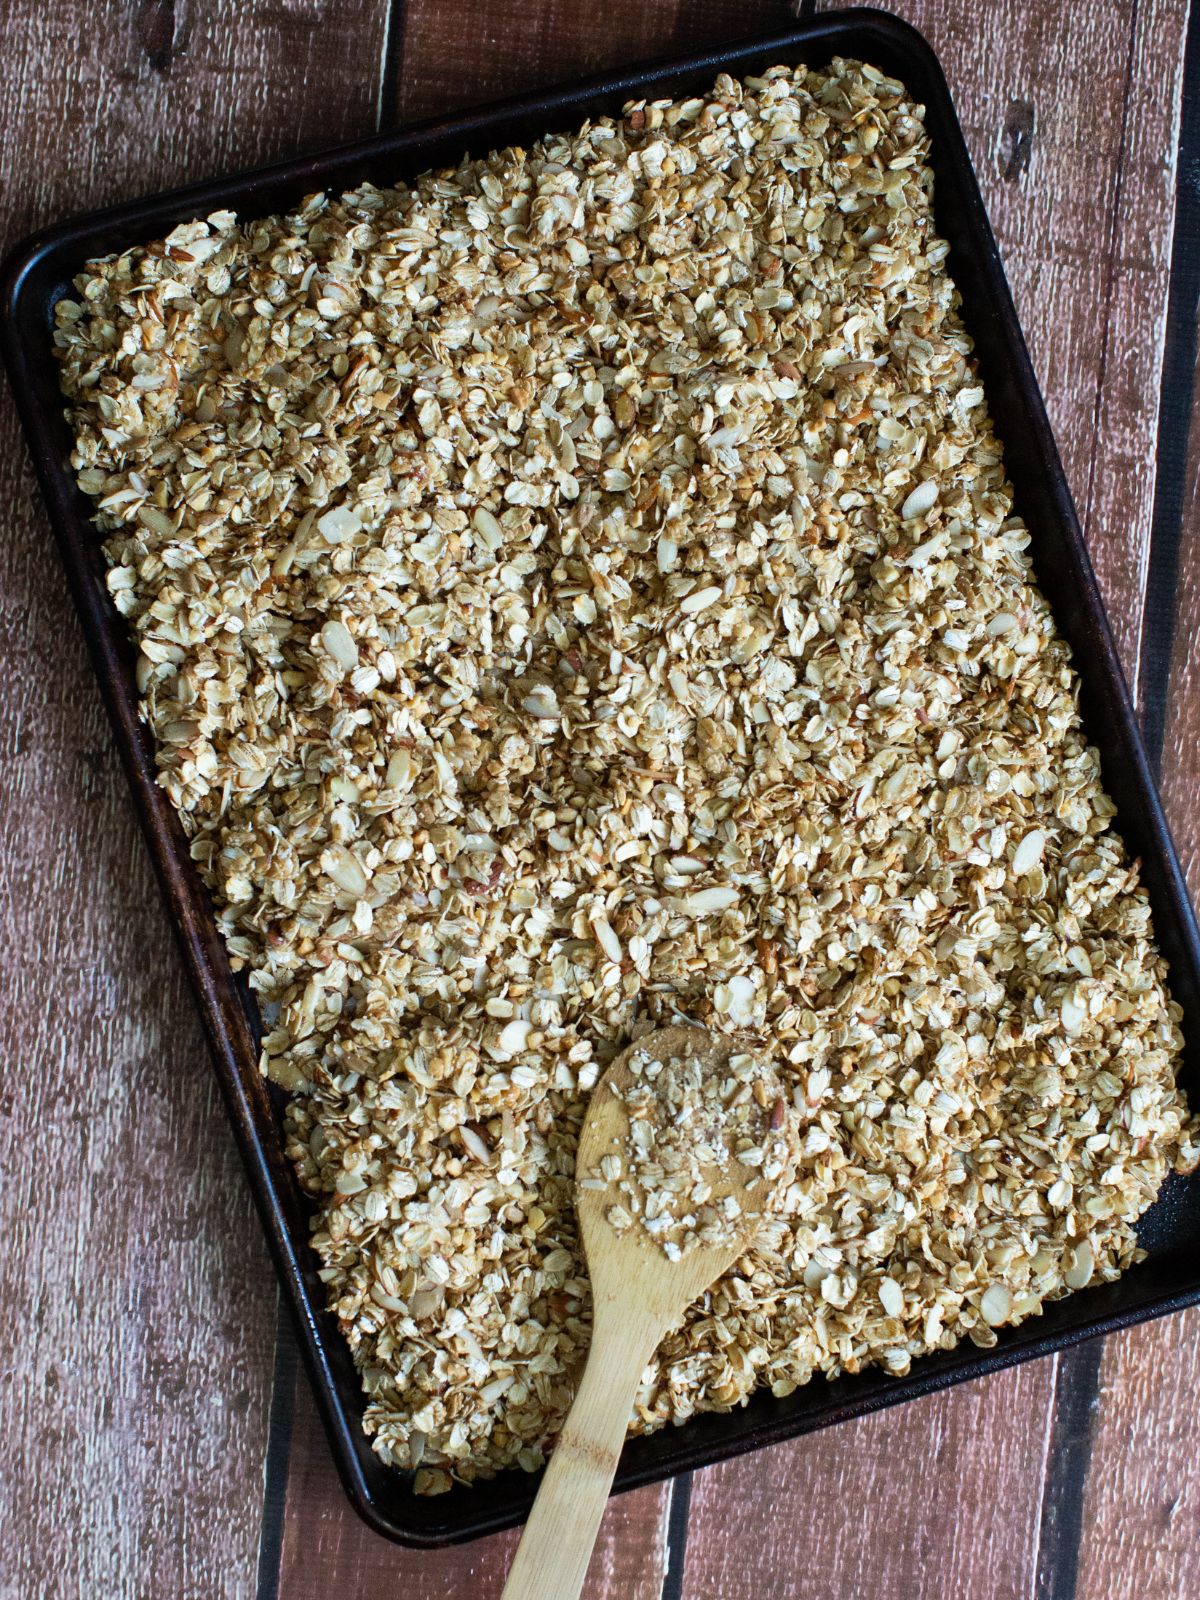 unbaked granola on baking tray with wooden spoon.